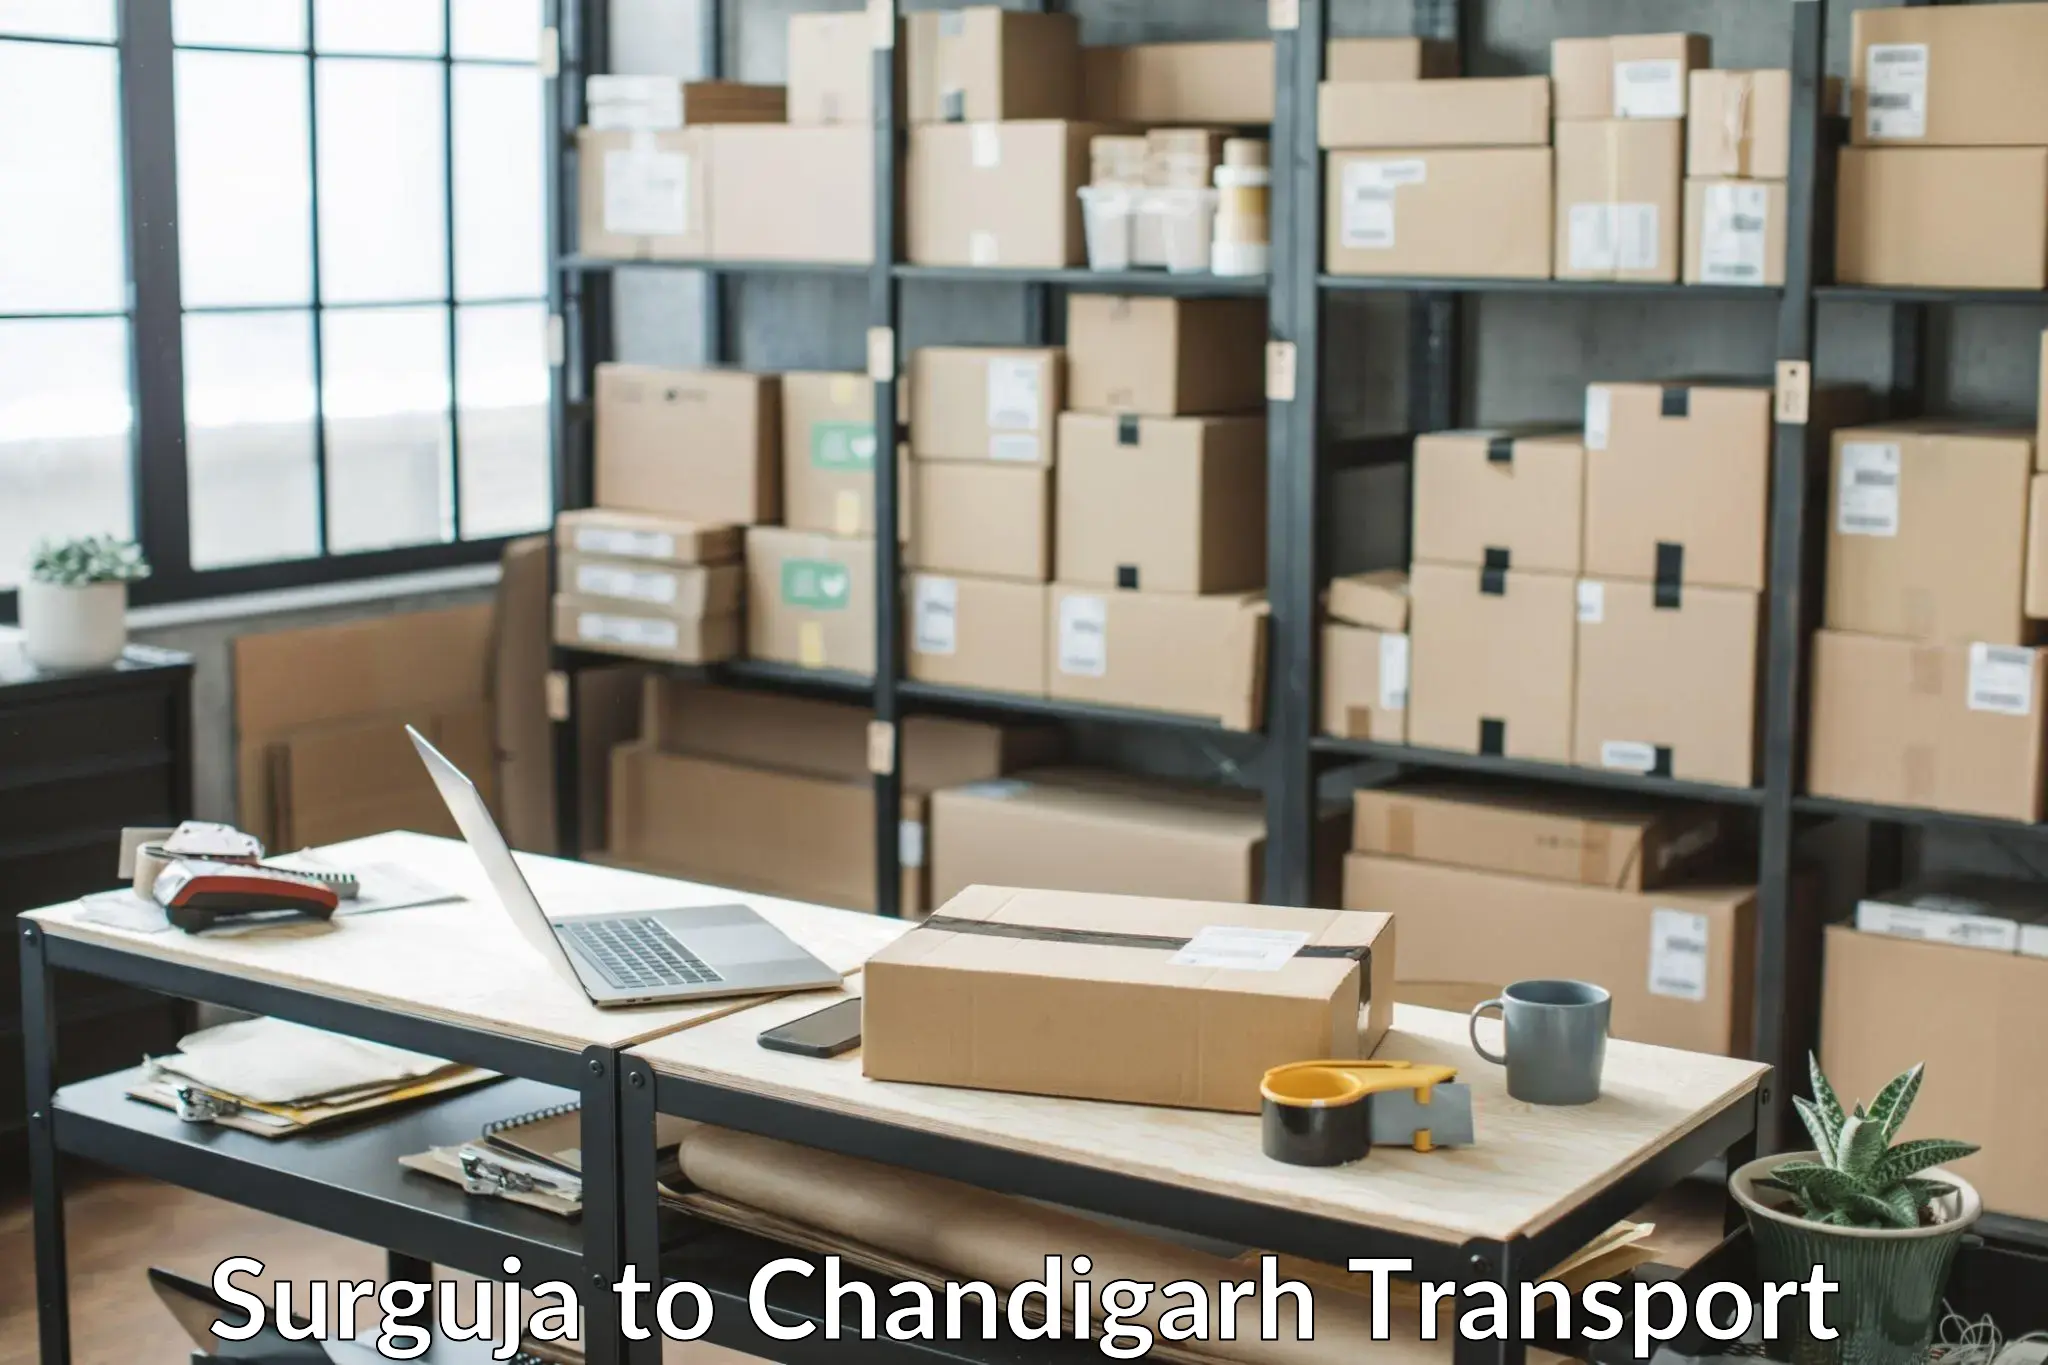 Goods delivery service Surguja to Chandigarh